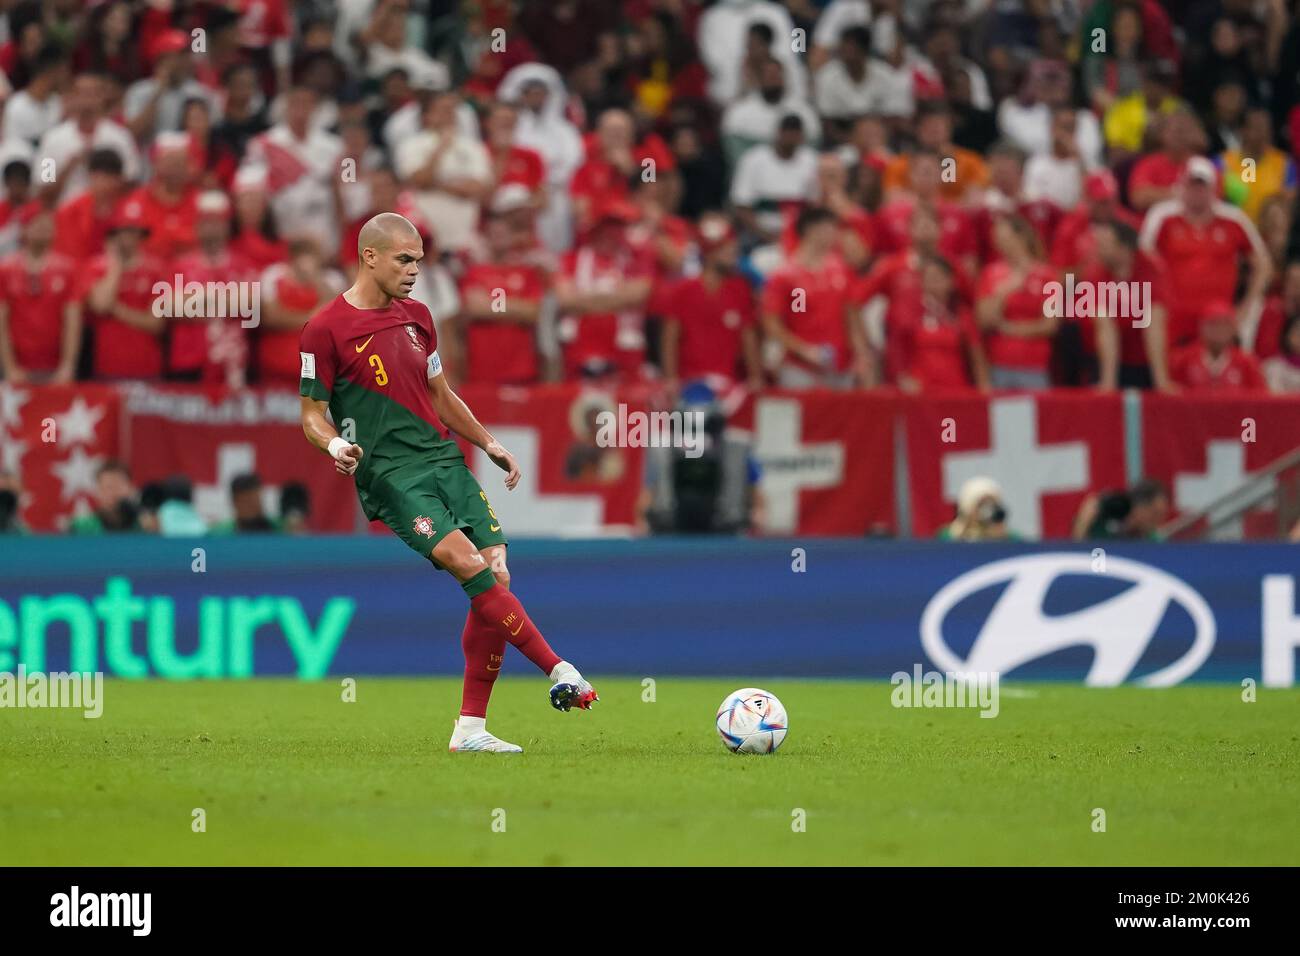 LUSAIL, QATAR - DECEMBER 6: Player of Portugal Pepe passes the ball during the FIFA World Cup Qatar 2022 Round of 16 match between Portugal and Switzerland at Lusail Stadium on December 6, 2022 in Lusail, Qatar. (Photo by Florencia Tan Jun/PxImages) Stock Photo